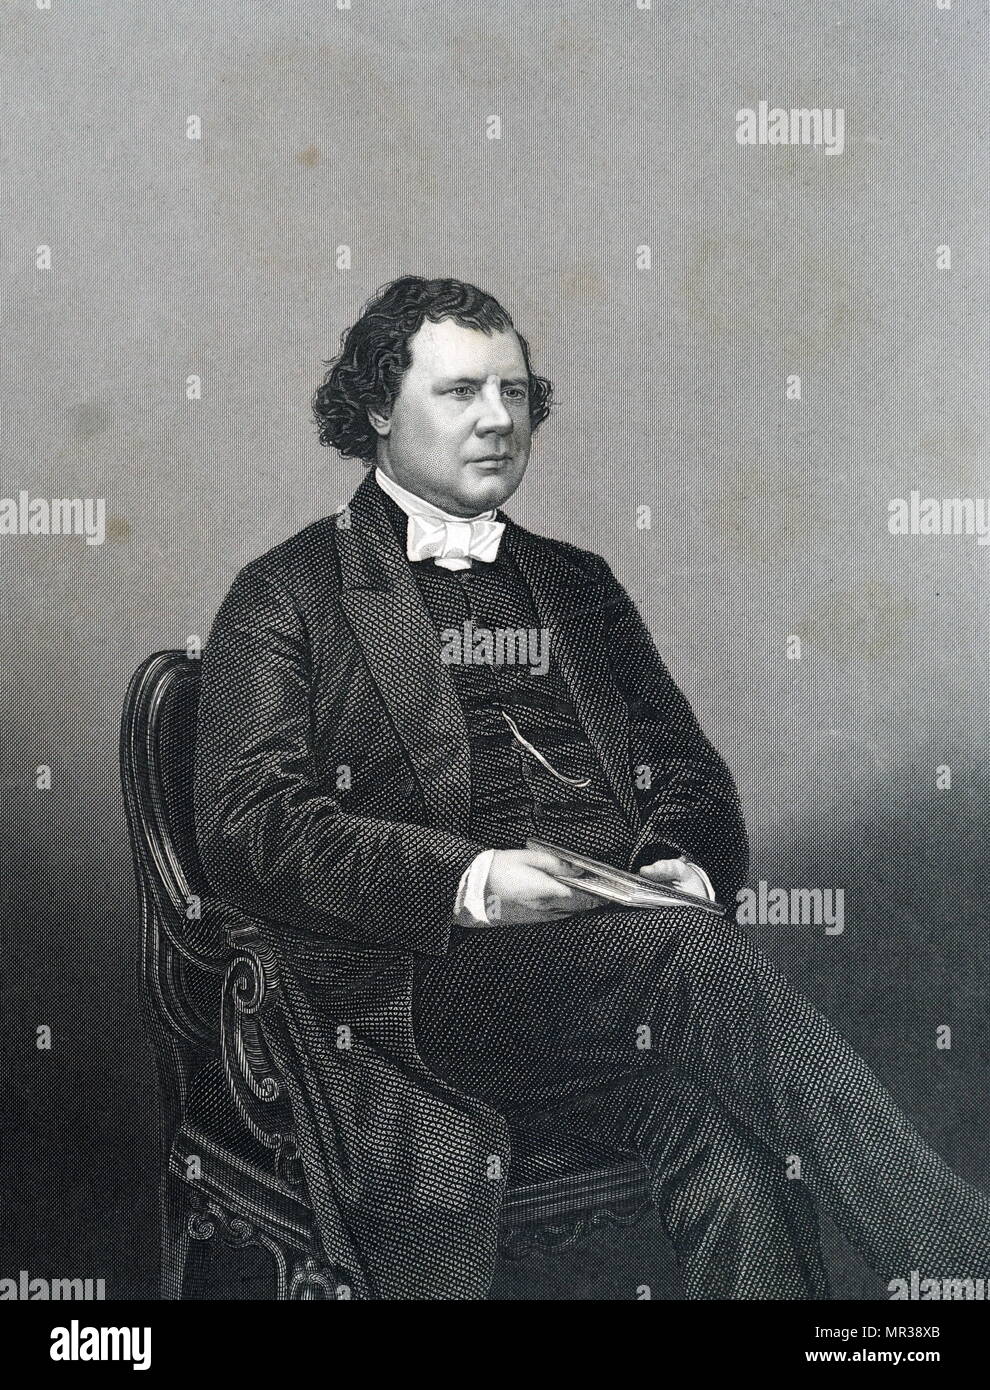 Photographic portrait of William Morley Punshon (1824-1881) an English Nonconformist minister. Dated 19th century Stock Photo